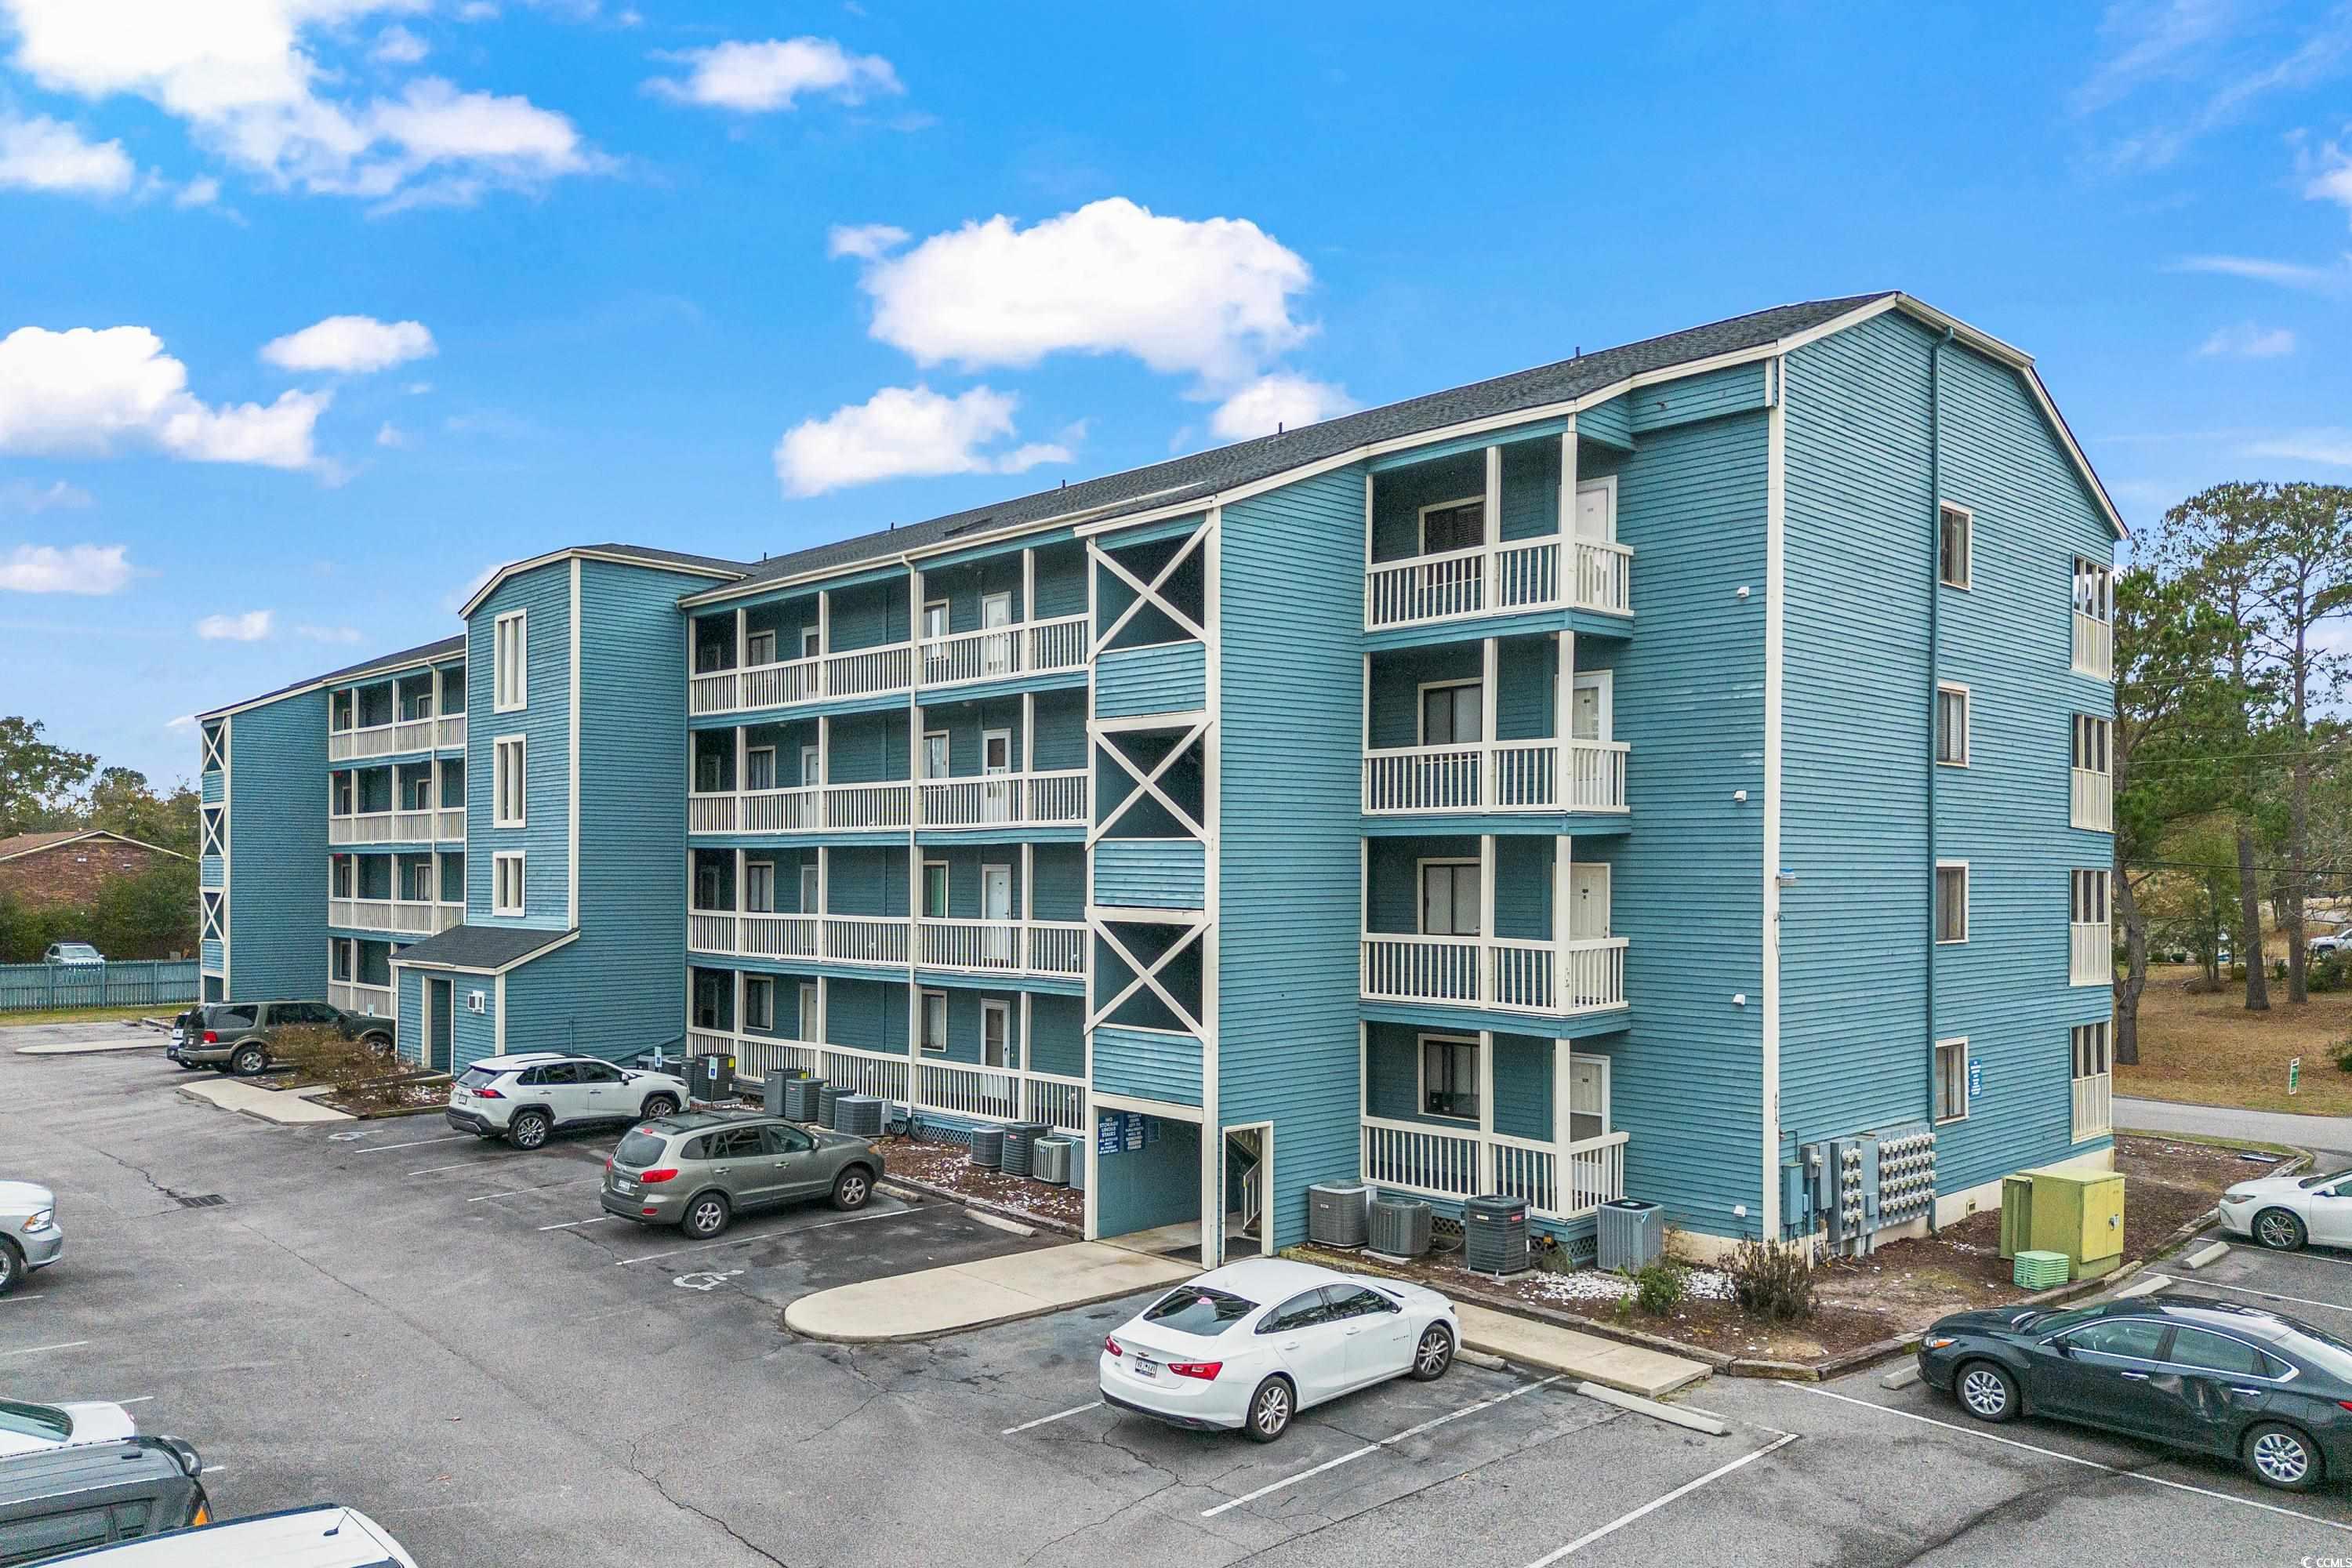 perfect 2 bed, 2 bath golf and beach getaway or permanent residence. this lovely unit in an elevator building is located perfectly in the heart of little river and only 10 minutes from the beach!  condo has a new hvac within the last year, new paint, carpet and flooring.